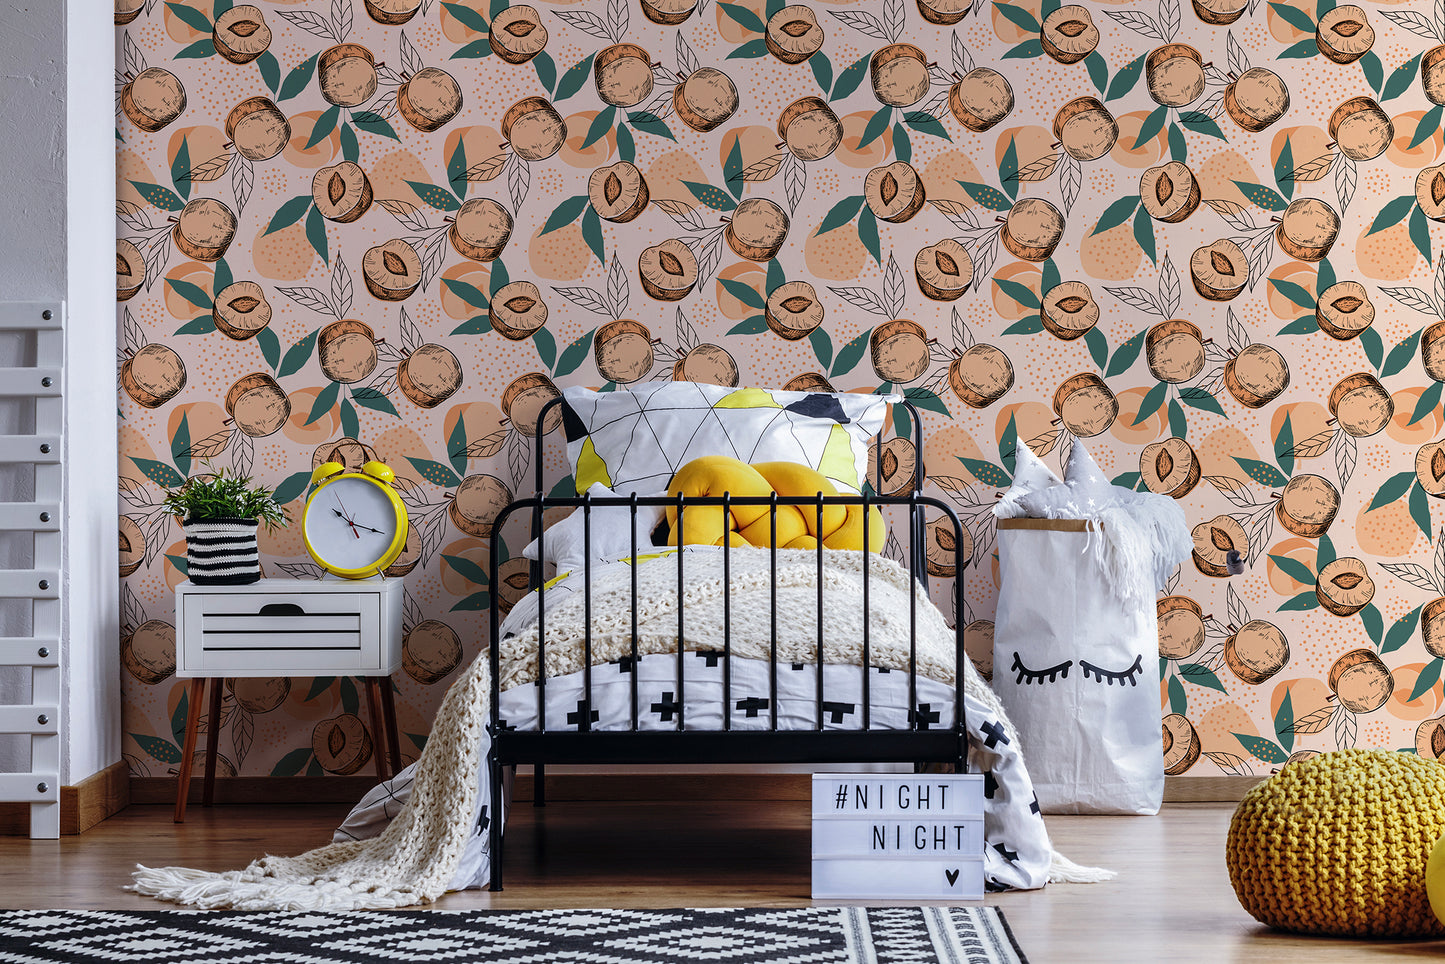 Just Peachy Removable Peel And Stick Wallpaper